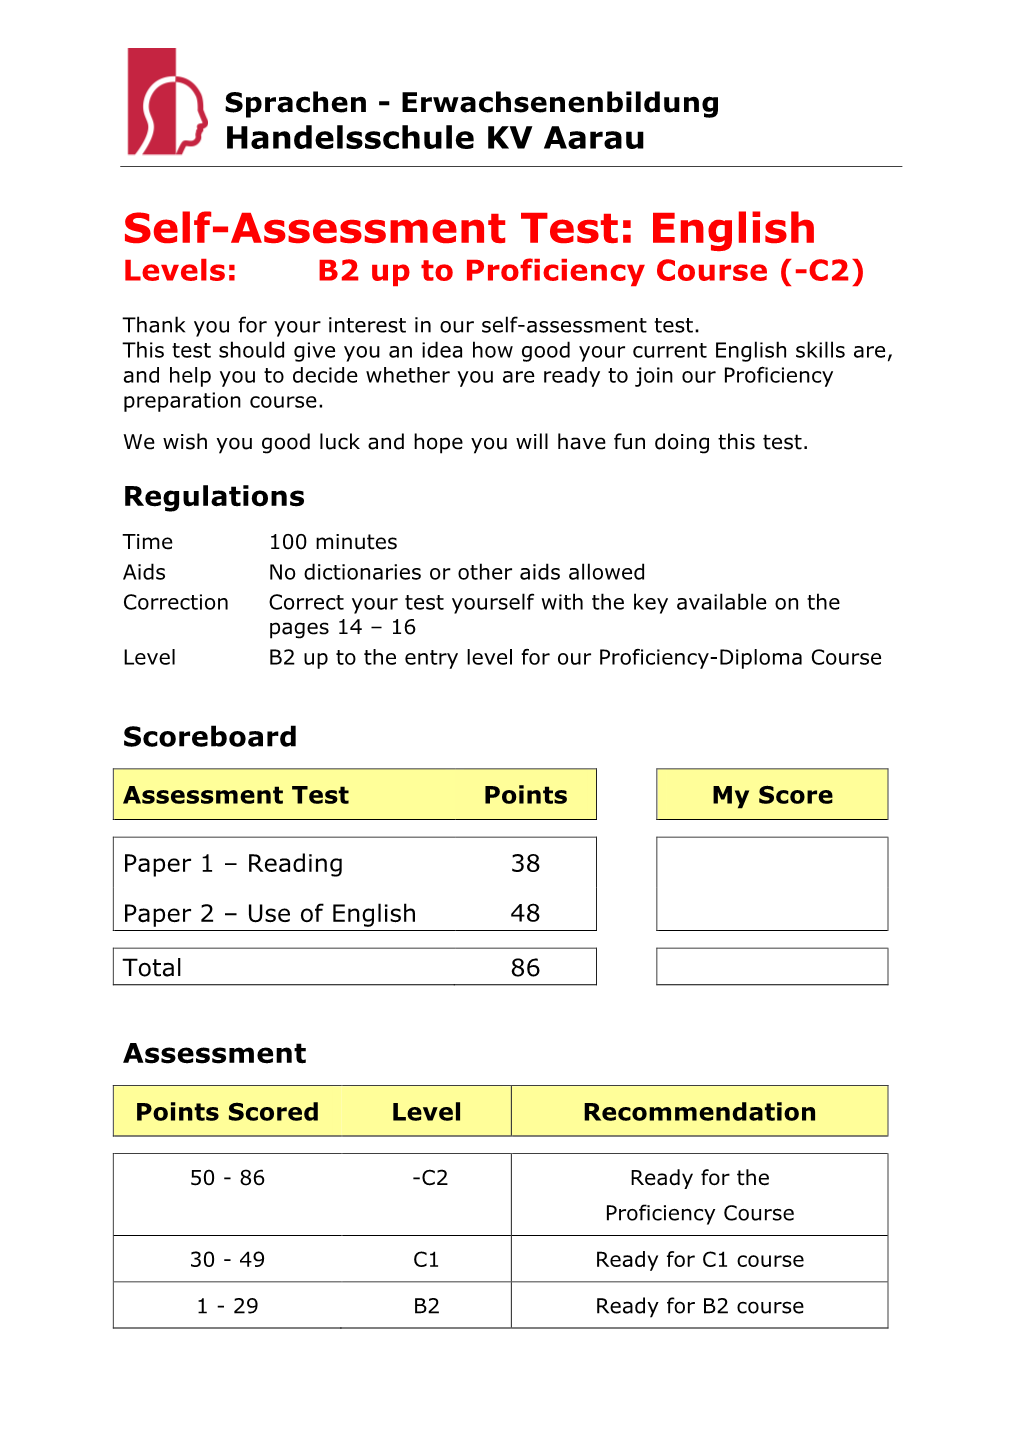 Self-Assessment Test: English Levels: B2 up to Proficiency Course (-C2)